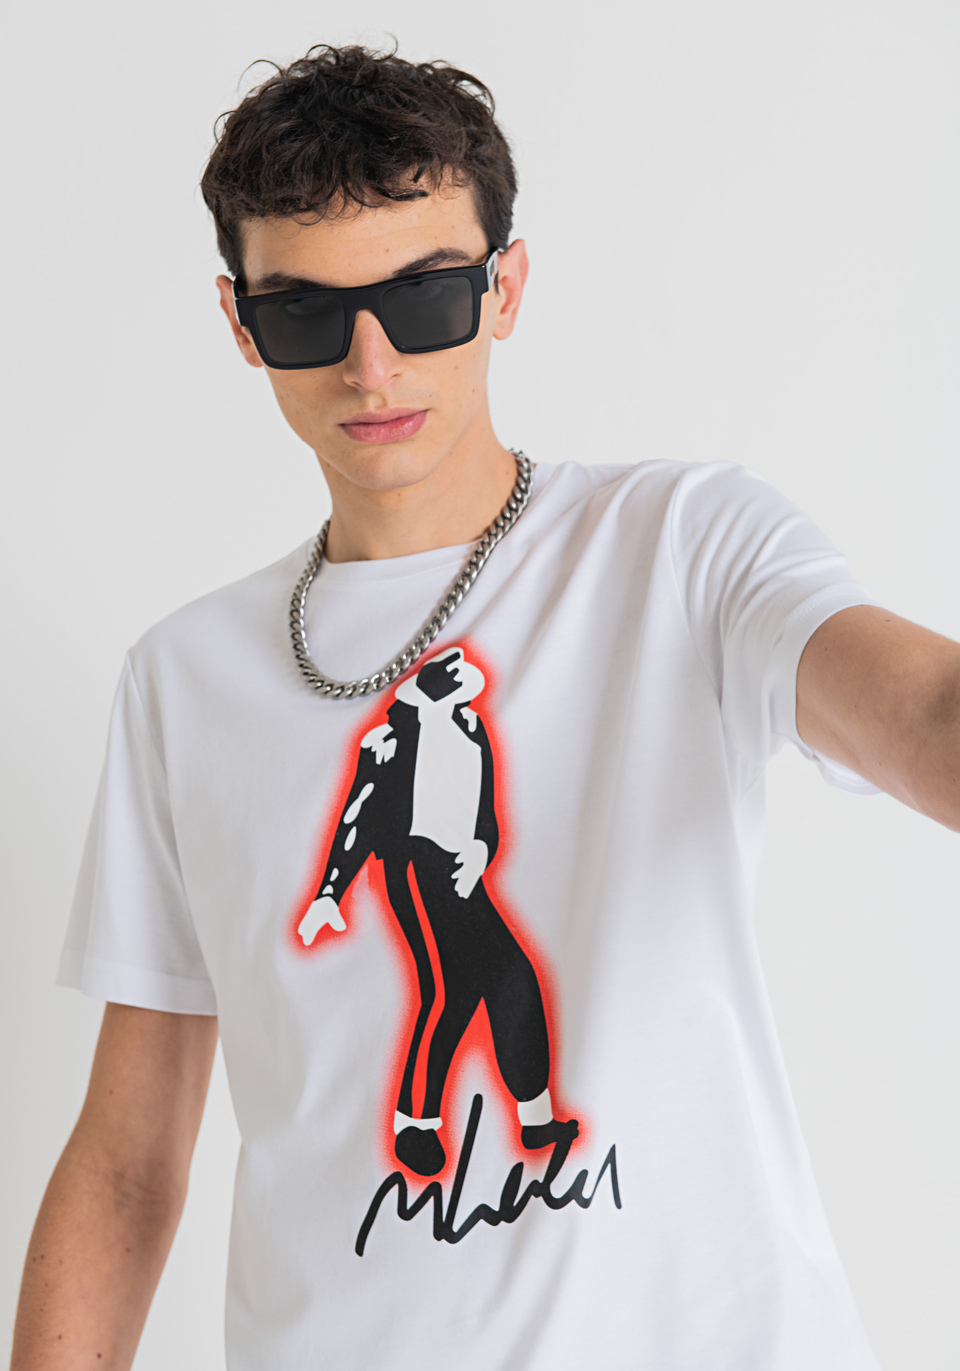 SLIM-FIT T-SHIRT IN PURE COTTON WITH MICHEAL JACKSON PRINT BY MARCO LODOLA - Antony Morato Online Shop